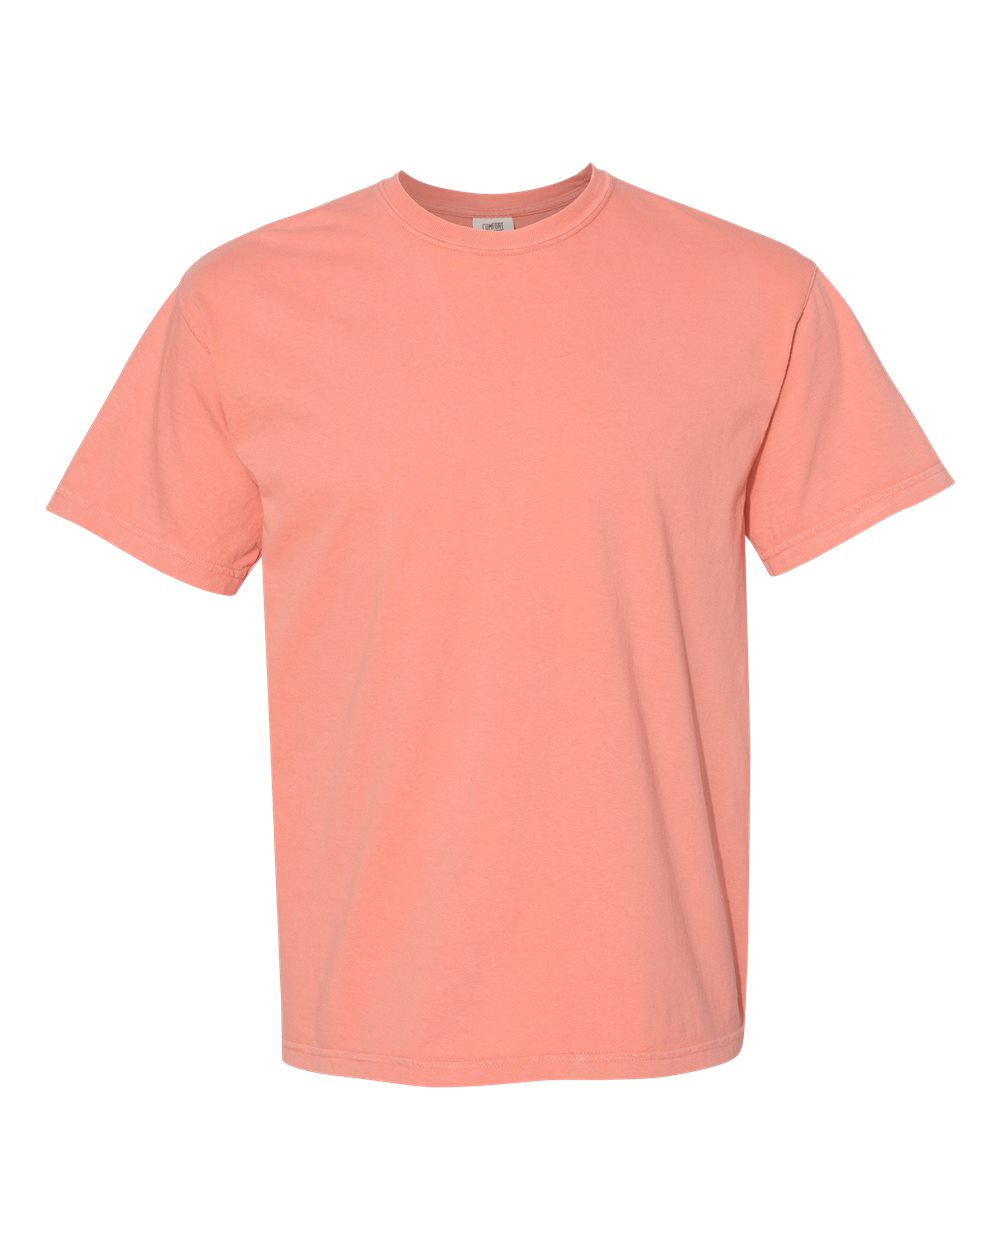 Comfort Colors Garment-Dyed Tee (1717) in Terracotta